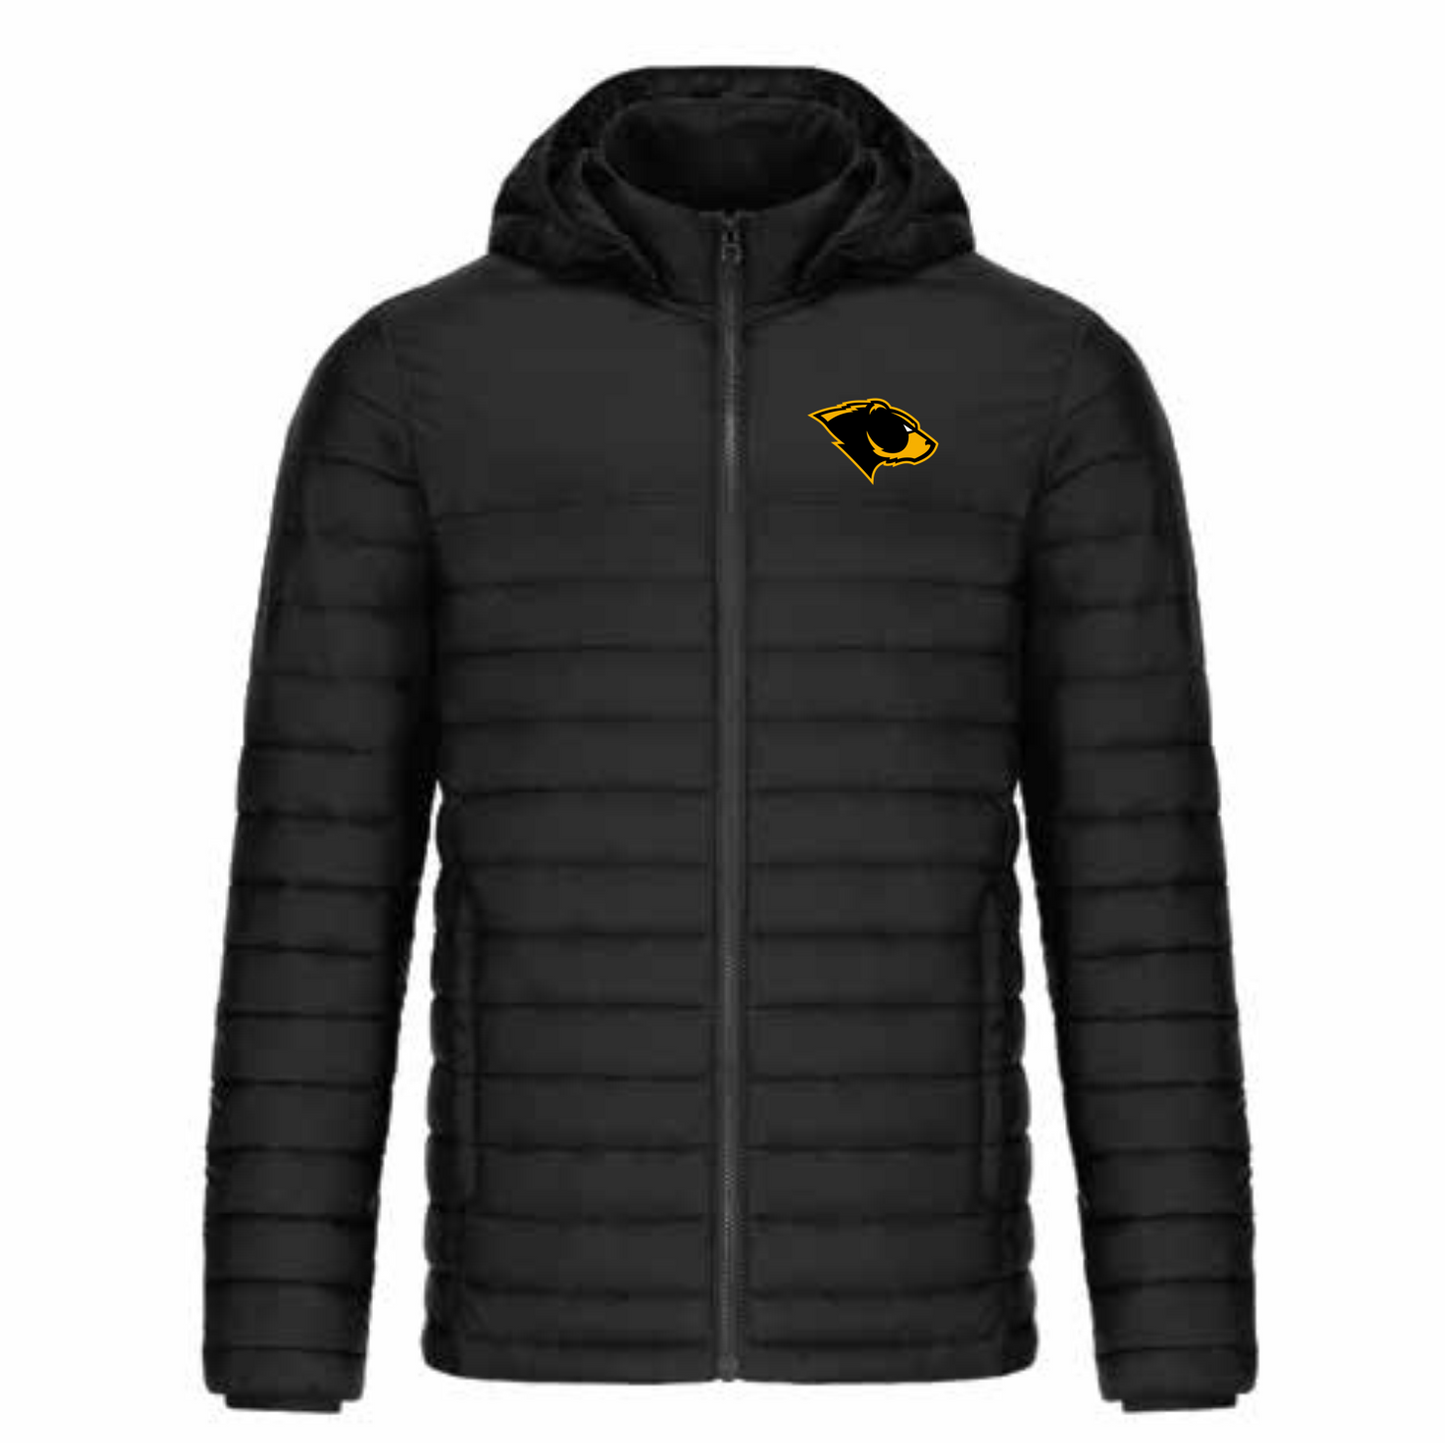 ORDER BY OCT 6th, Ships week of NOV 7th  - Oakland Bears Canyon Lightweight Puffer Jacket - Youth